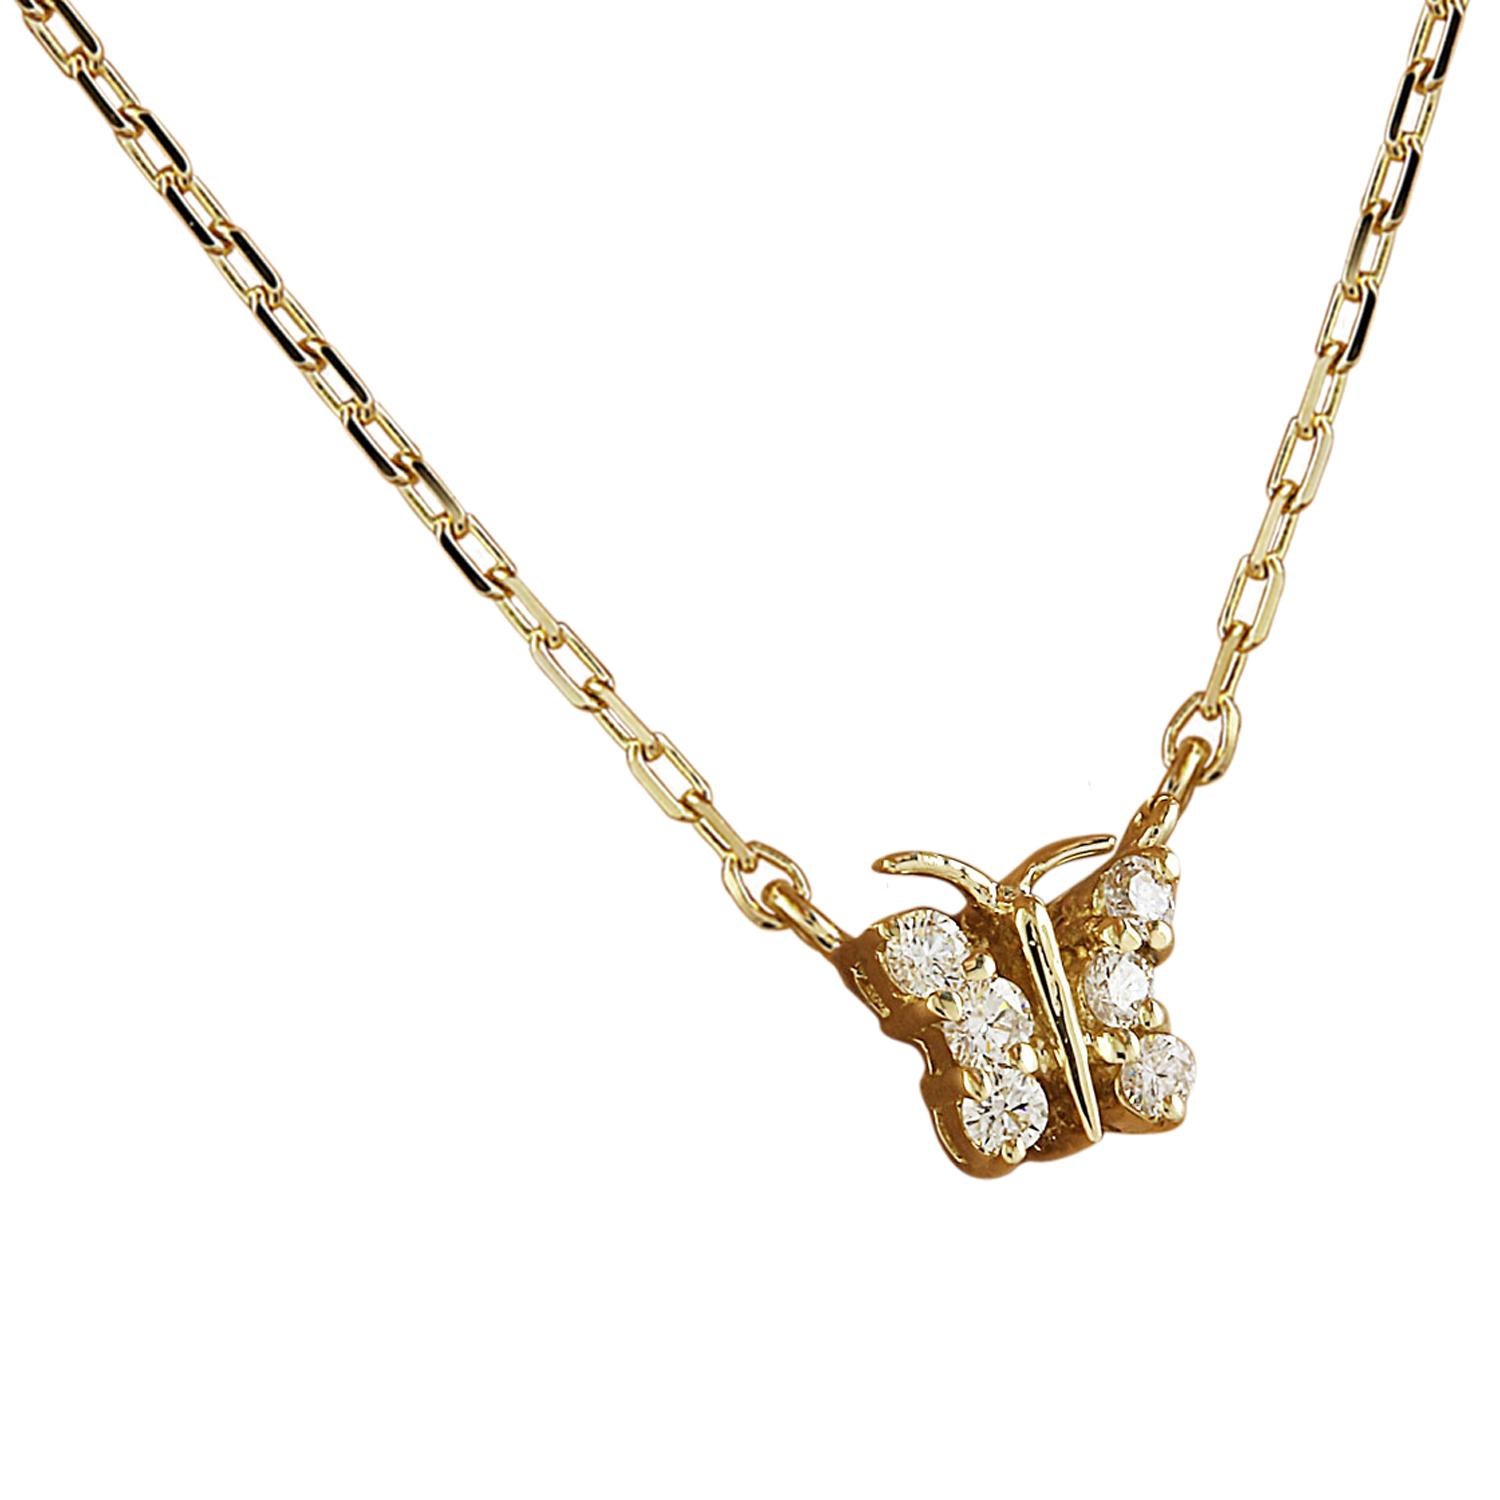 Introducing our enchanting 0.20 Carat Natural Diamond Butterfly Necklace crafted in exquisite 14 Karat Yellow Gold. Each delicate detail of this piece reflects the highest standards of craftsmanship and elegance. The necklace is elegantly stamped